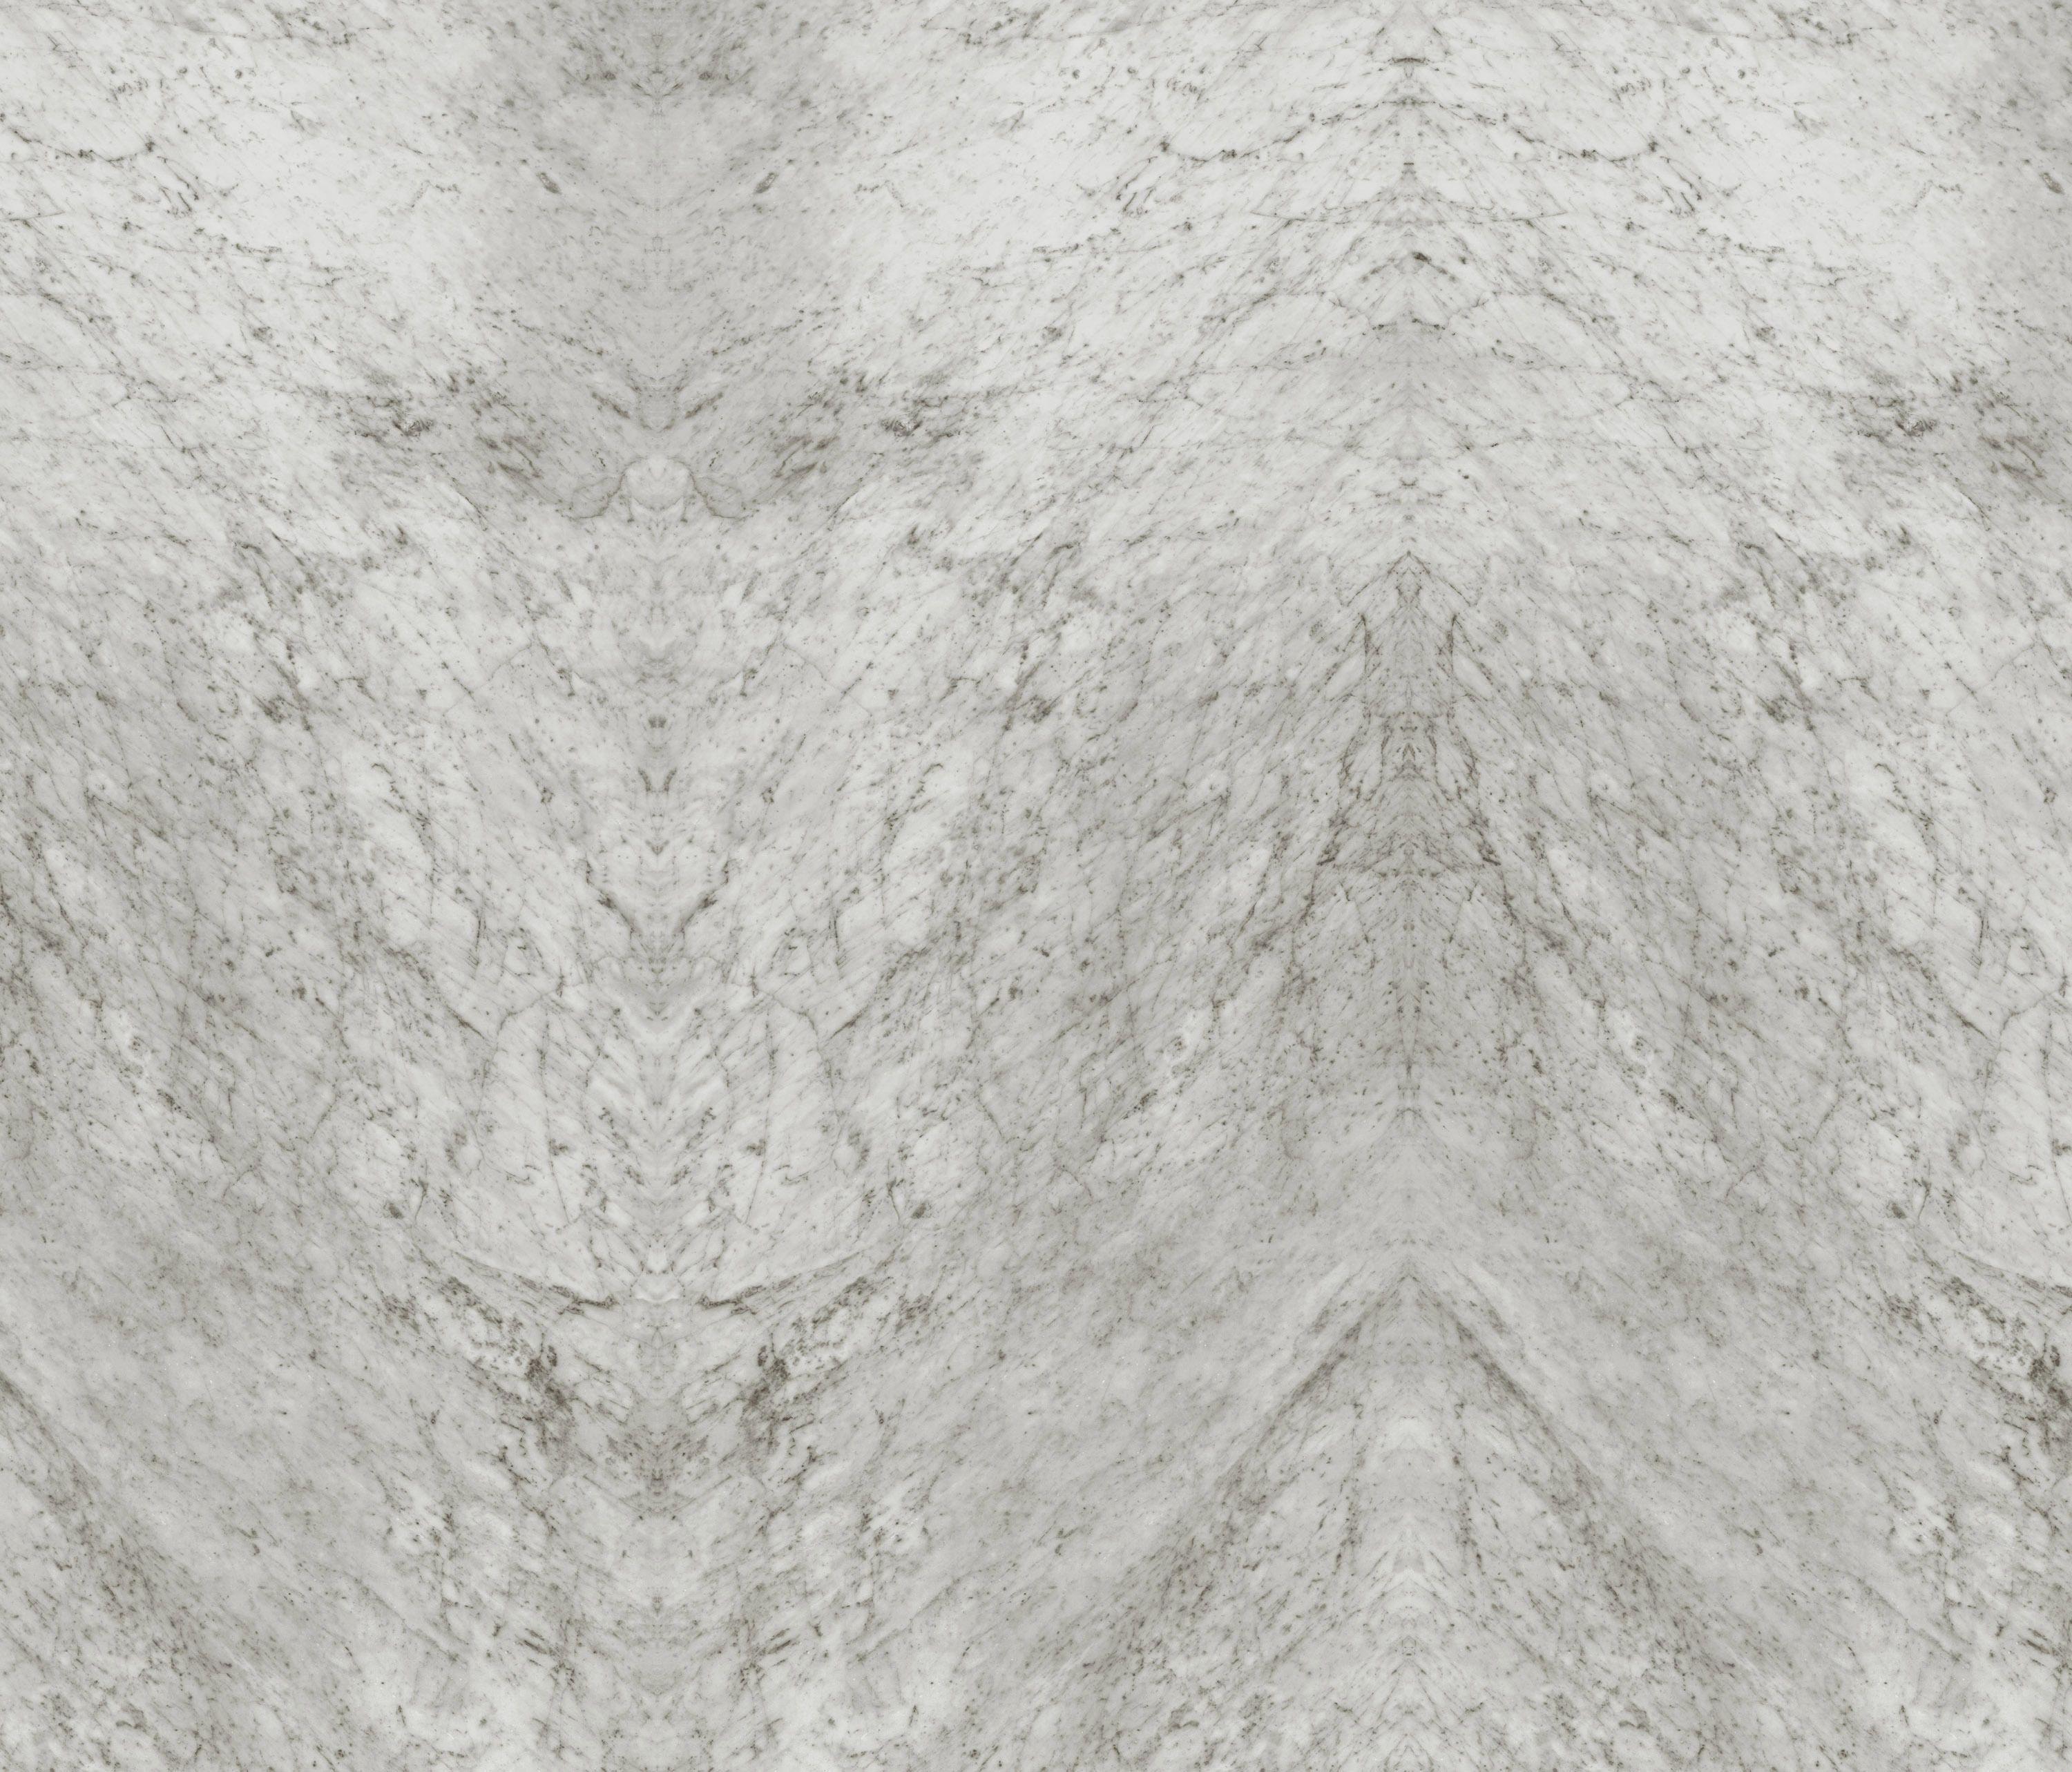 WHITE MARBLE coverings / wallpaper from Inkiostro Bianco